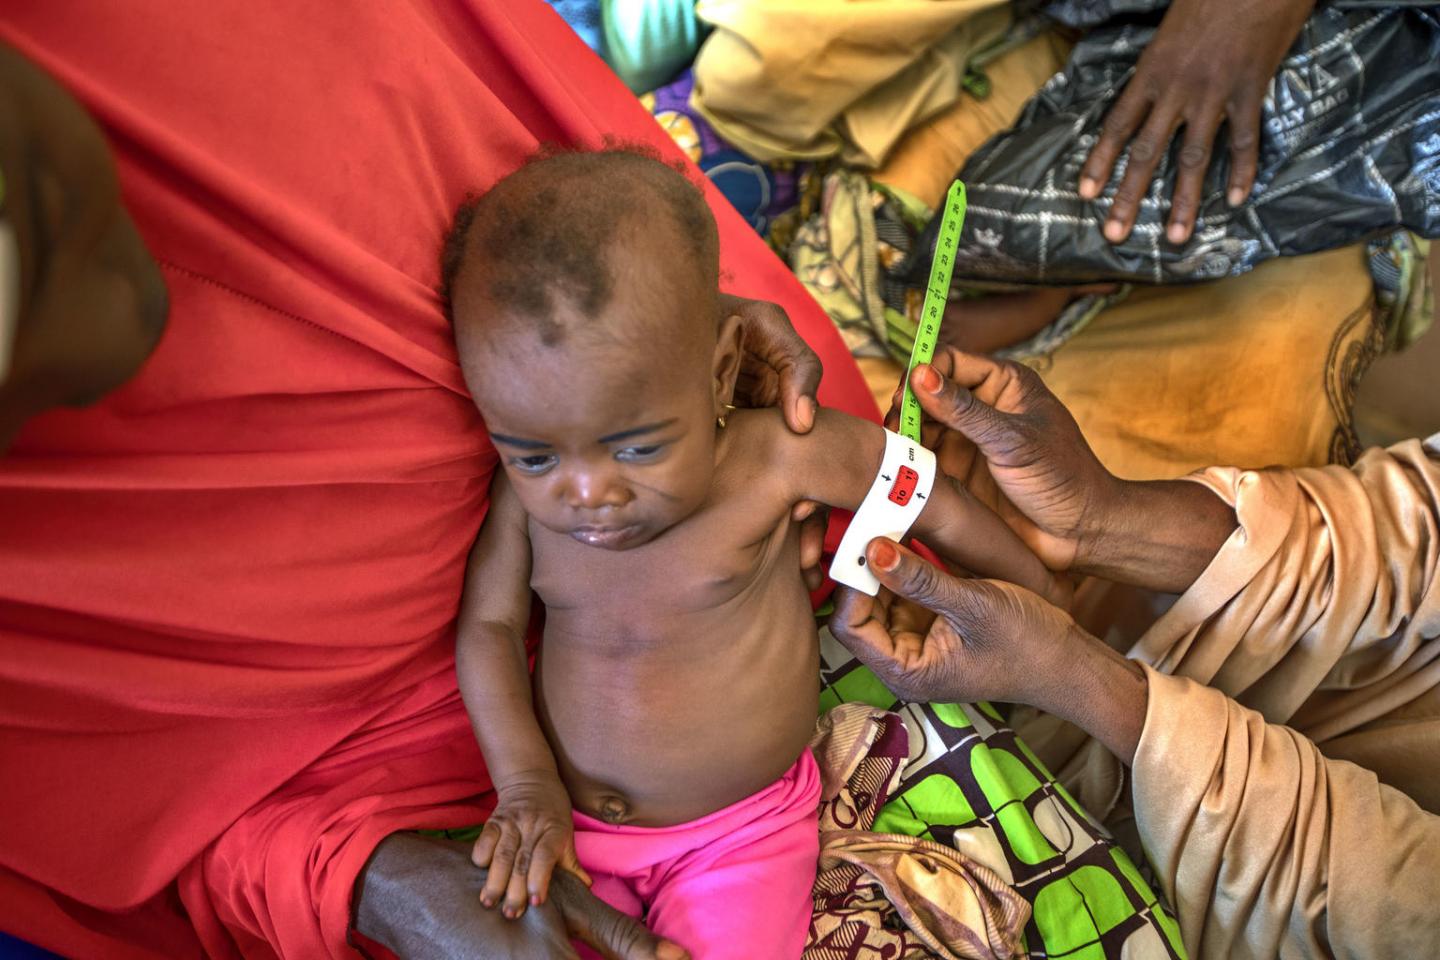 2018 Global Nutrition Report reveals malnutrition is unacceptably high and affects every country in the world, but there is also an unprecedented opportunity to end it.